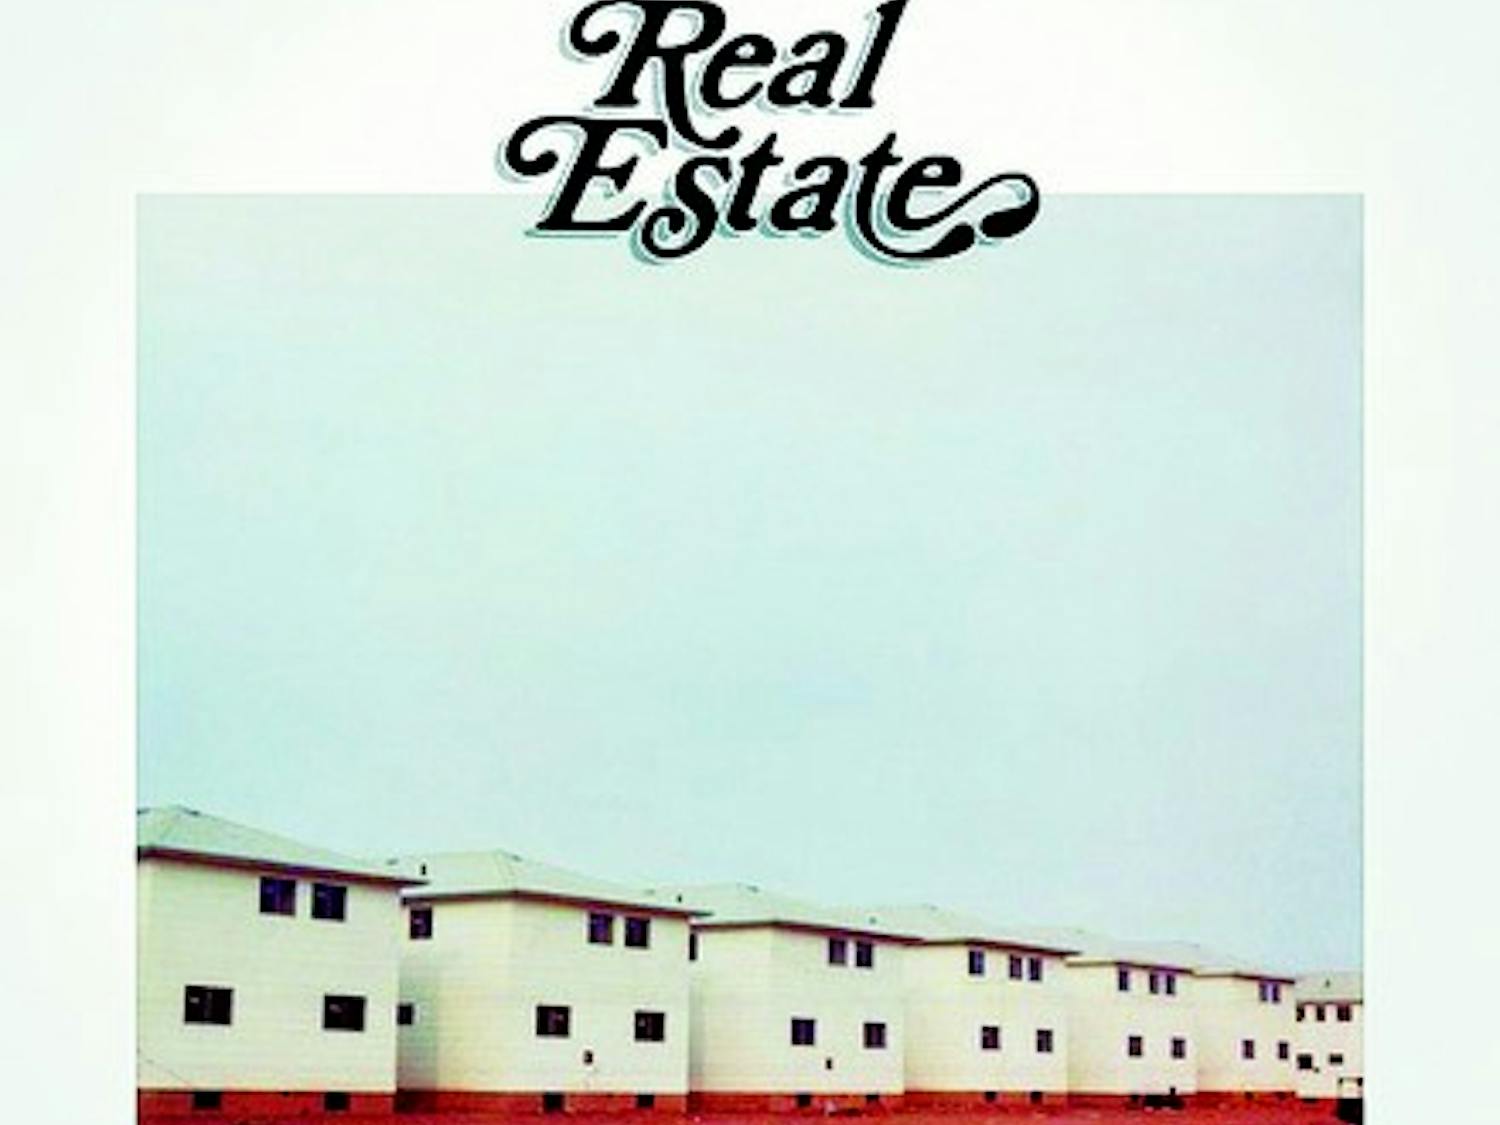 Real Estate's second full-length release, 